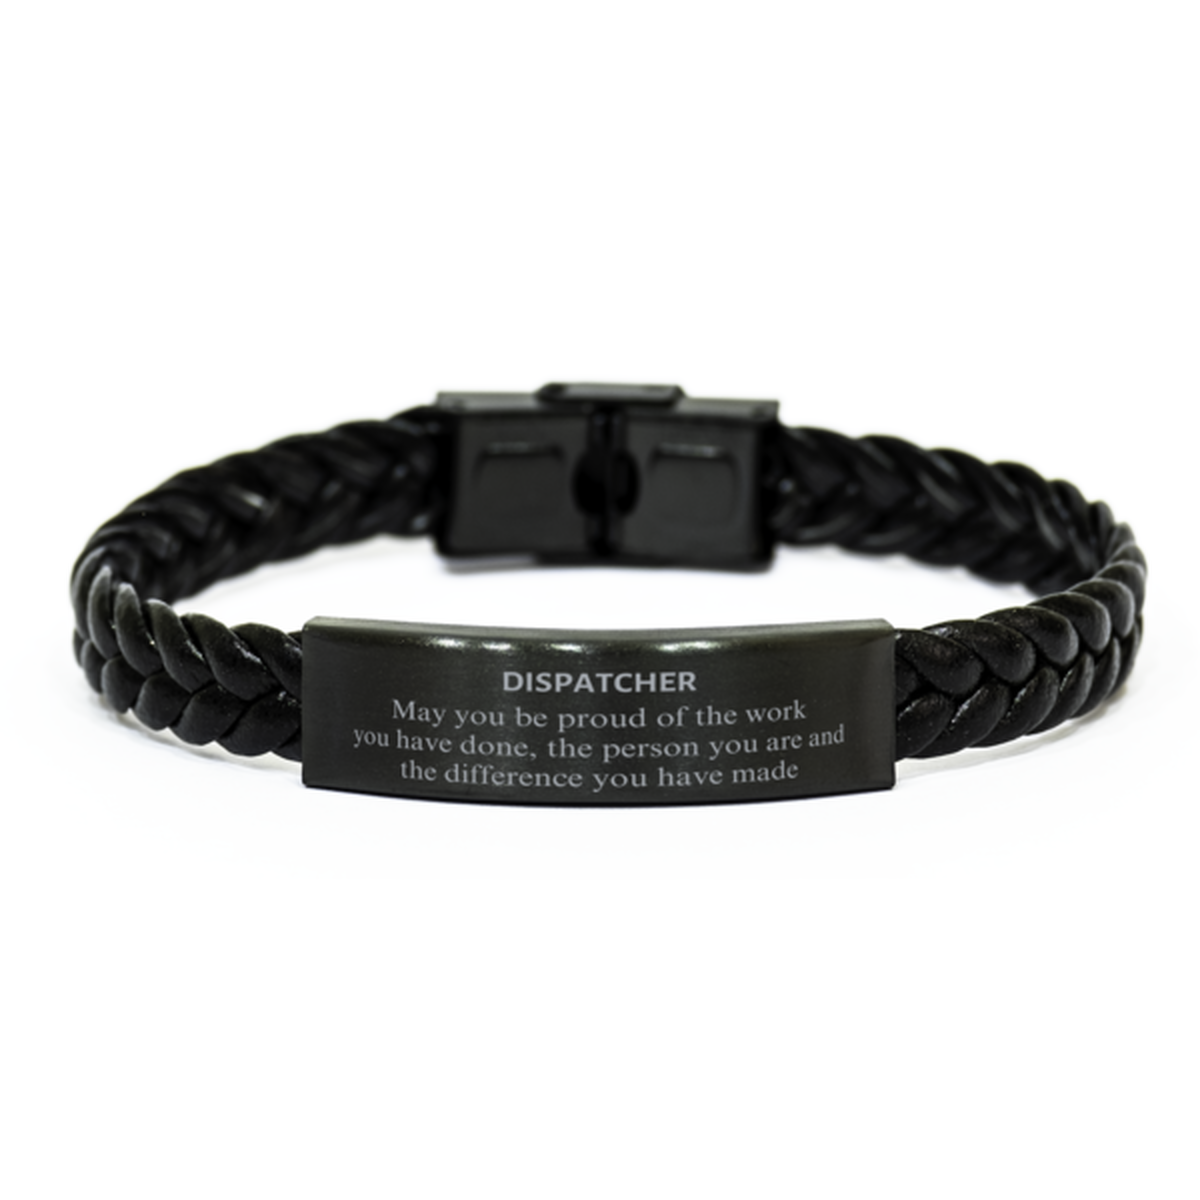 Dispatcher May you be proud of the work you have done, Retirement Dispatcher Braided Leather Bracelet for Colleague Appreciation Gifts Amazing for Dispatcher